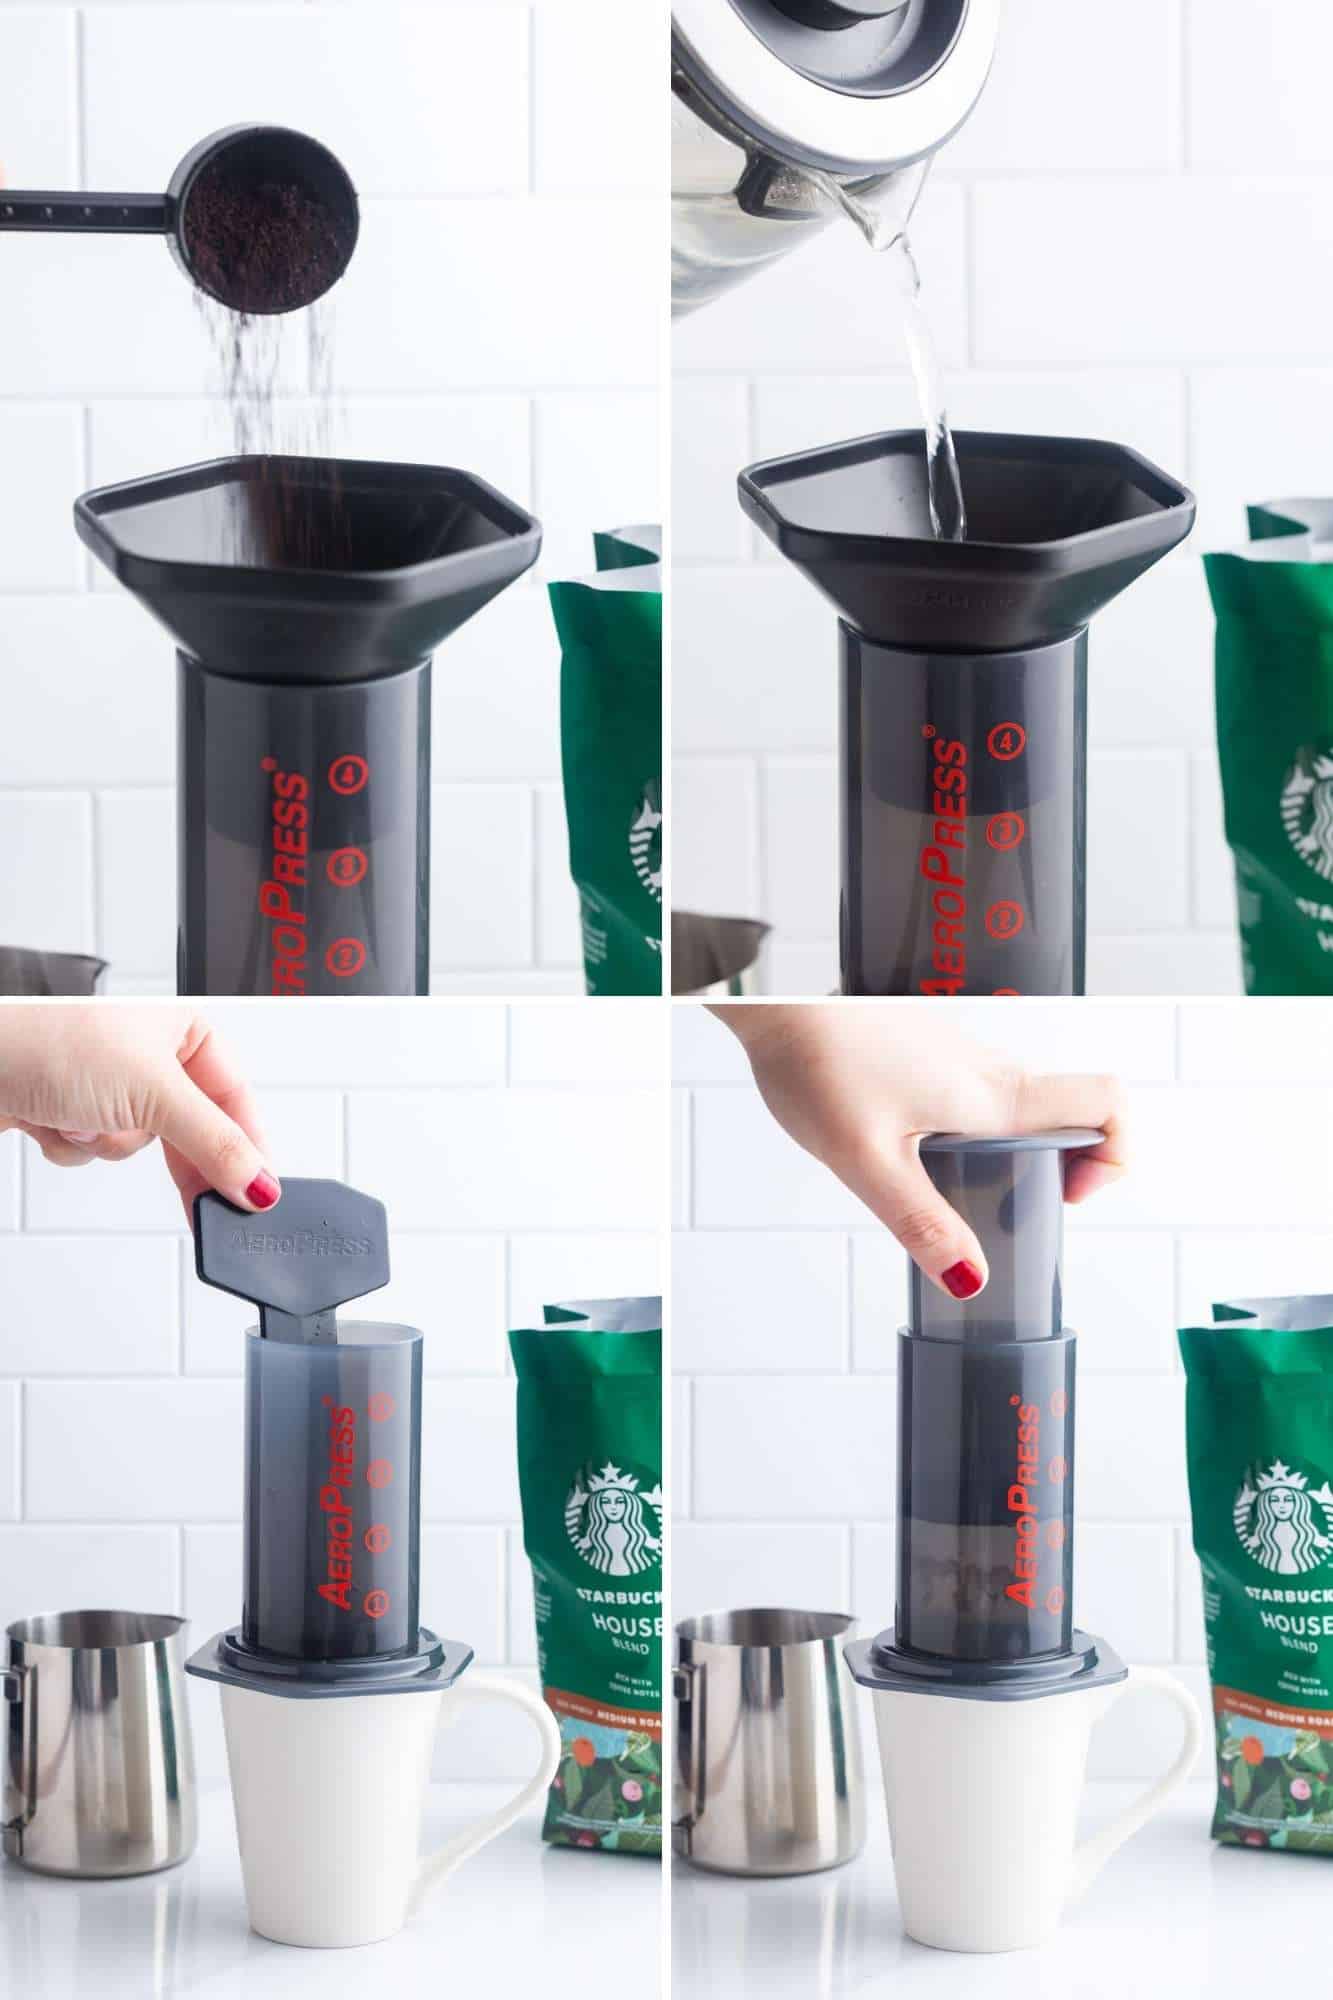 a collage of four images showing step by step how to make coffee with an aeropress coffee maker